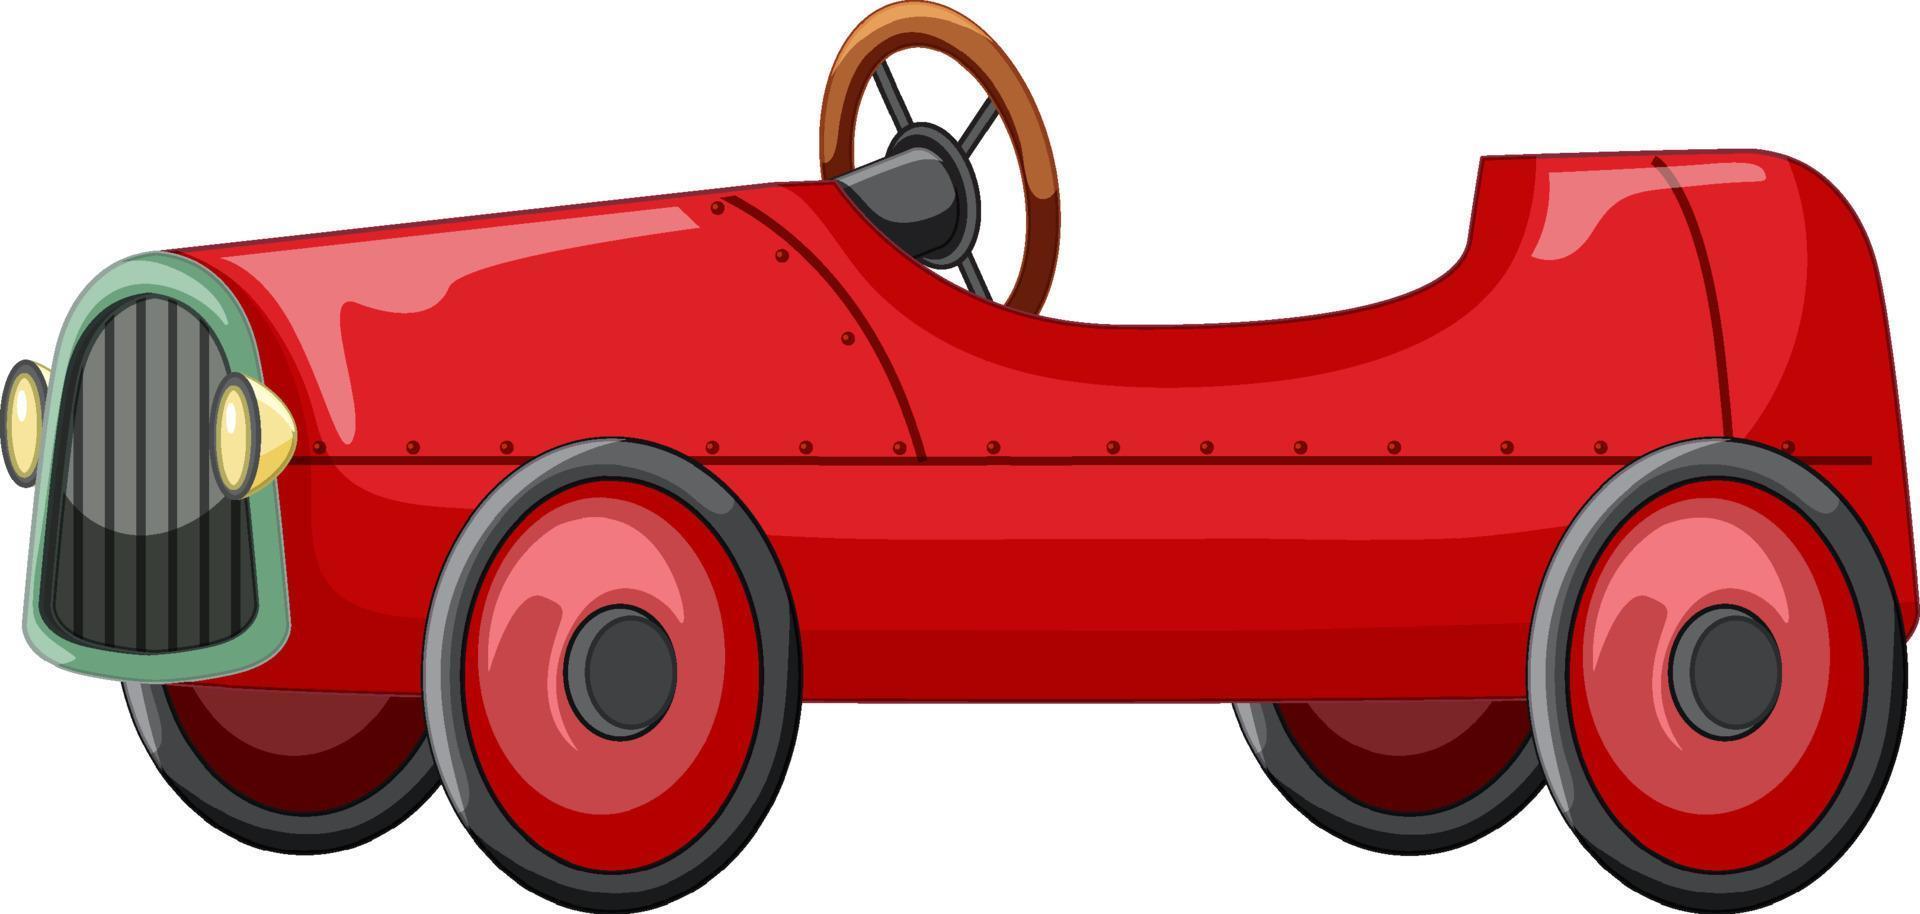 Vintage red car toy on white background vector